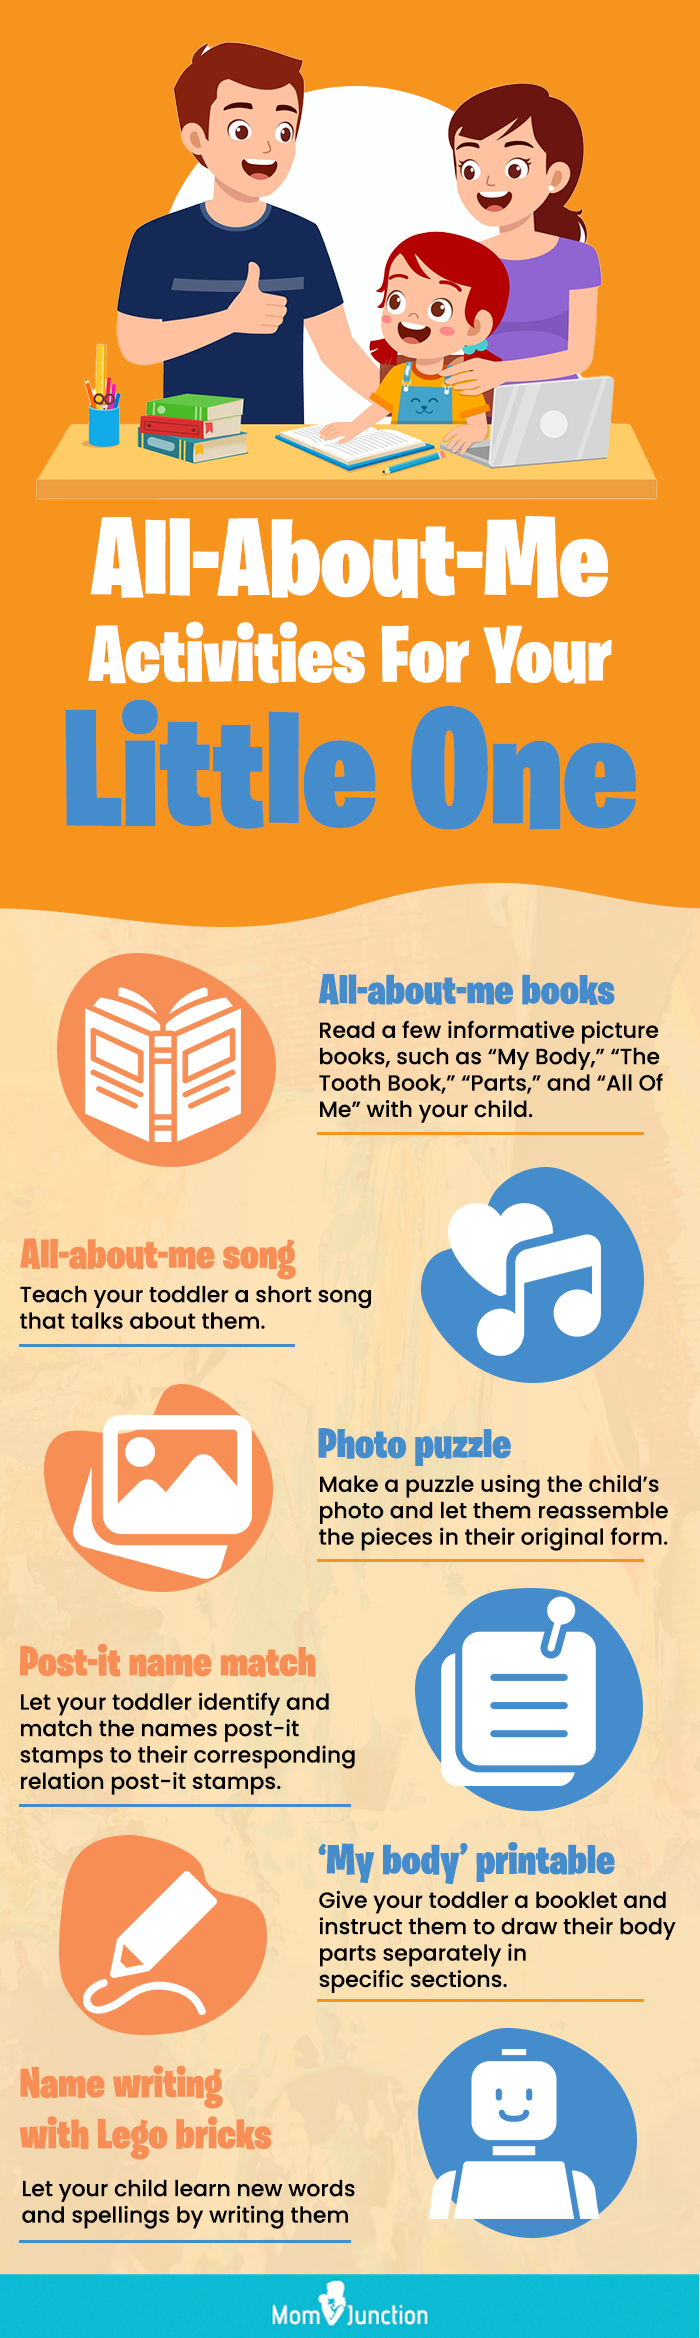 all about me activites for your little one (infographic)